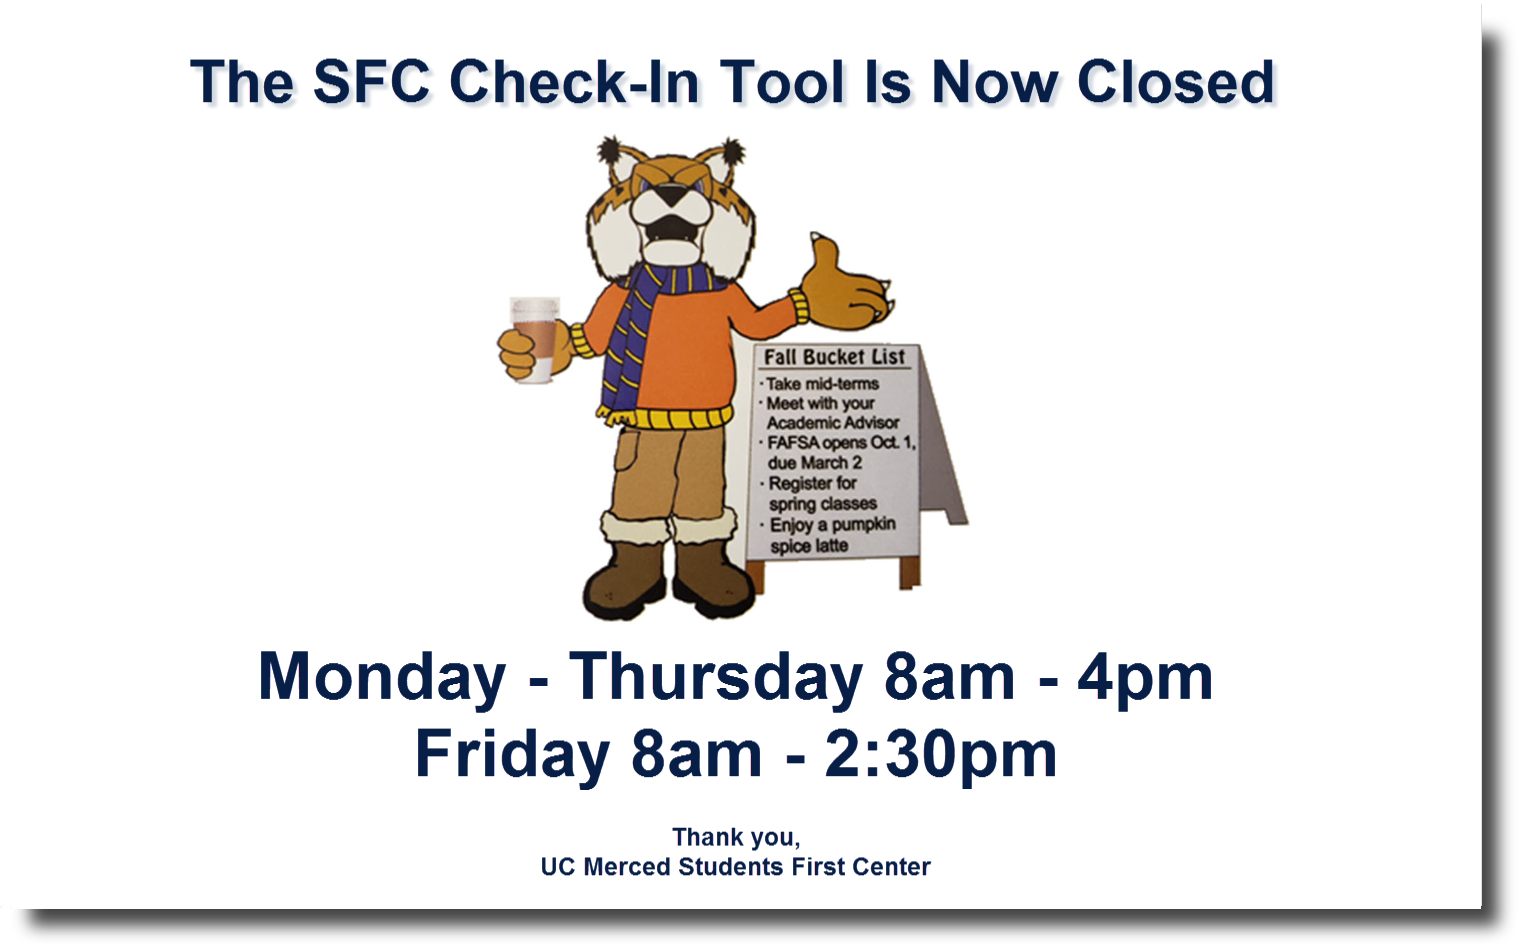 SFC Check-In Tool Closed